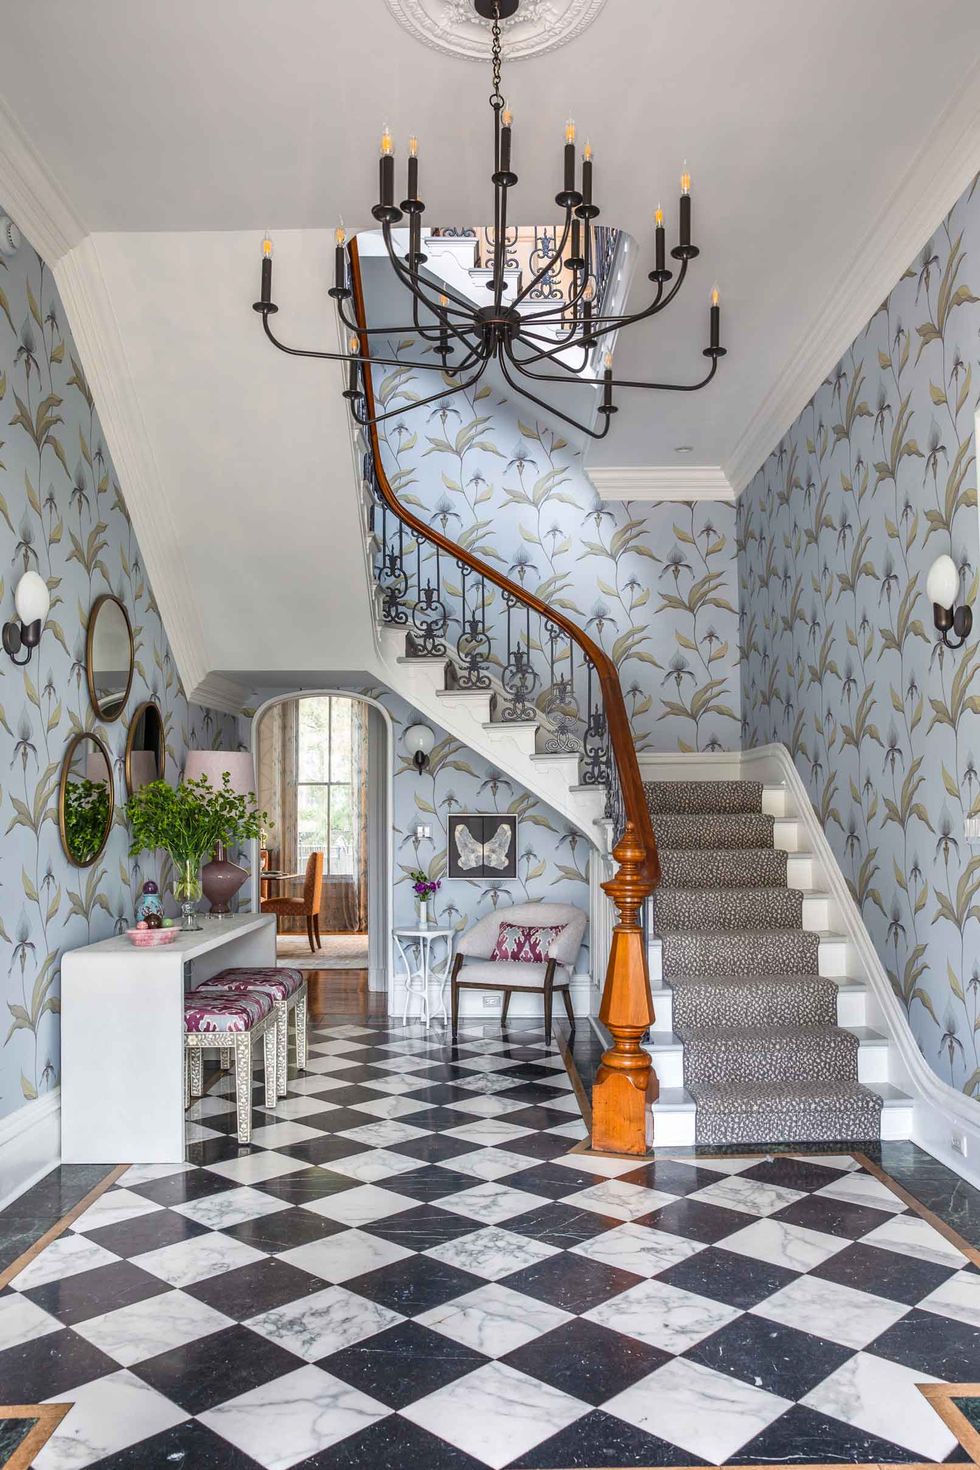 Tile, Property, Room, Interior design, Stairs, Floor, Wall, Building, House, Architecture, 